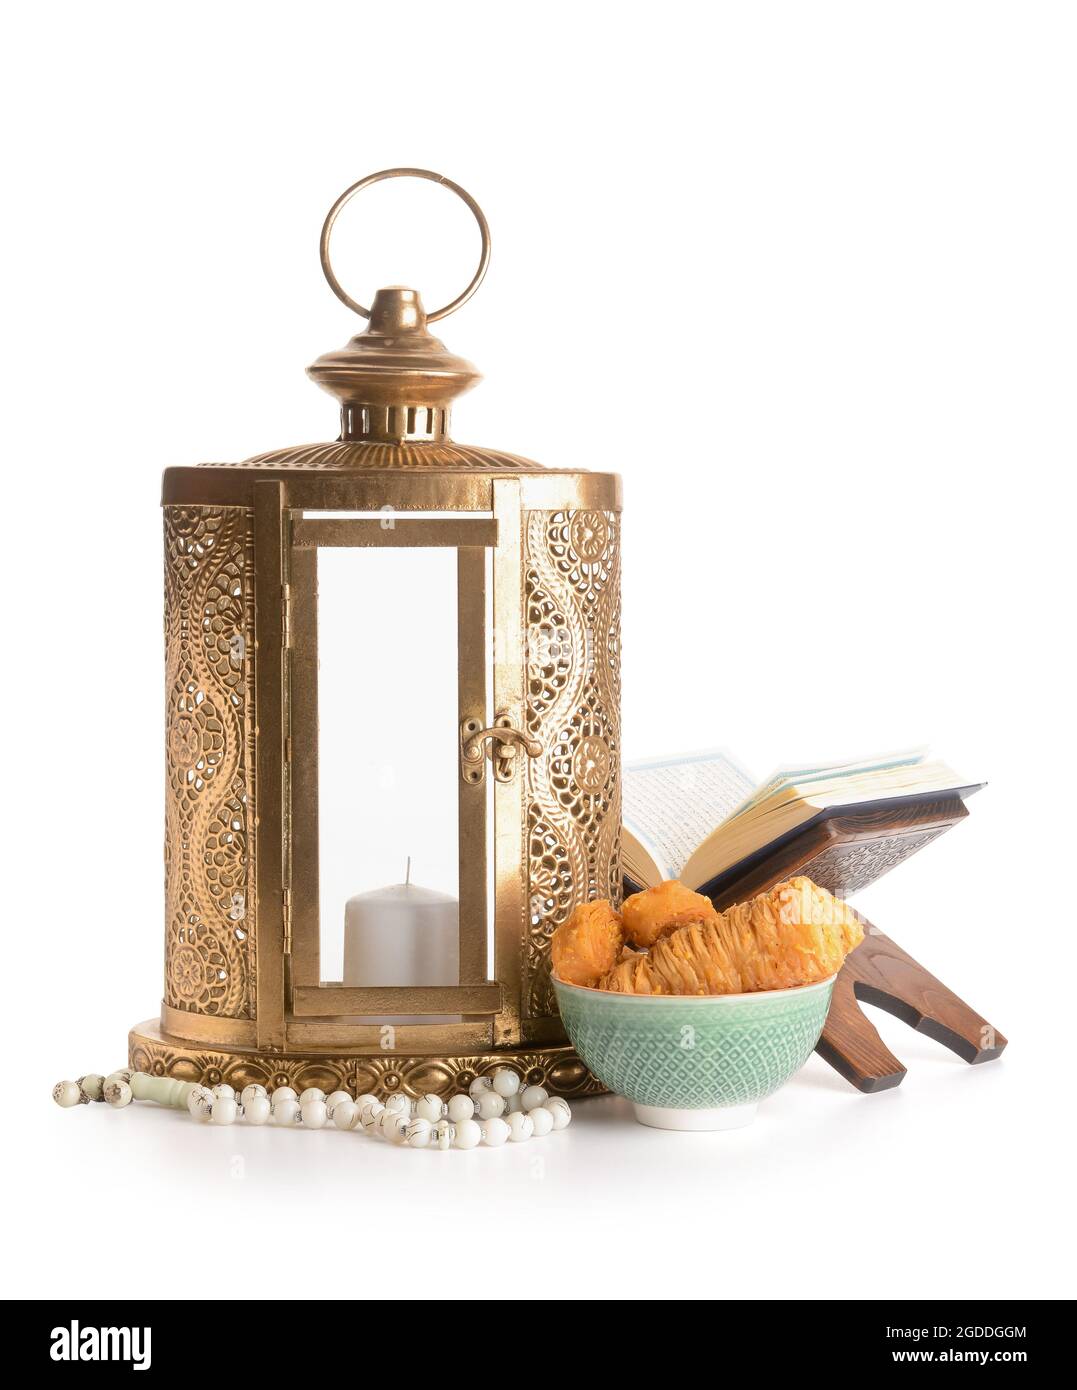 Muslim lantern with Quran, tasbih and Turkish sweets on white background Stock Photo